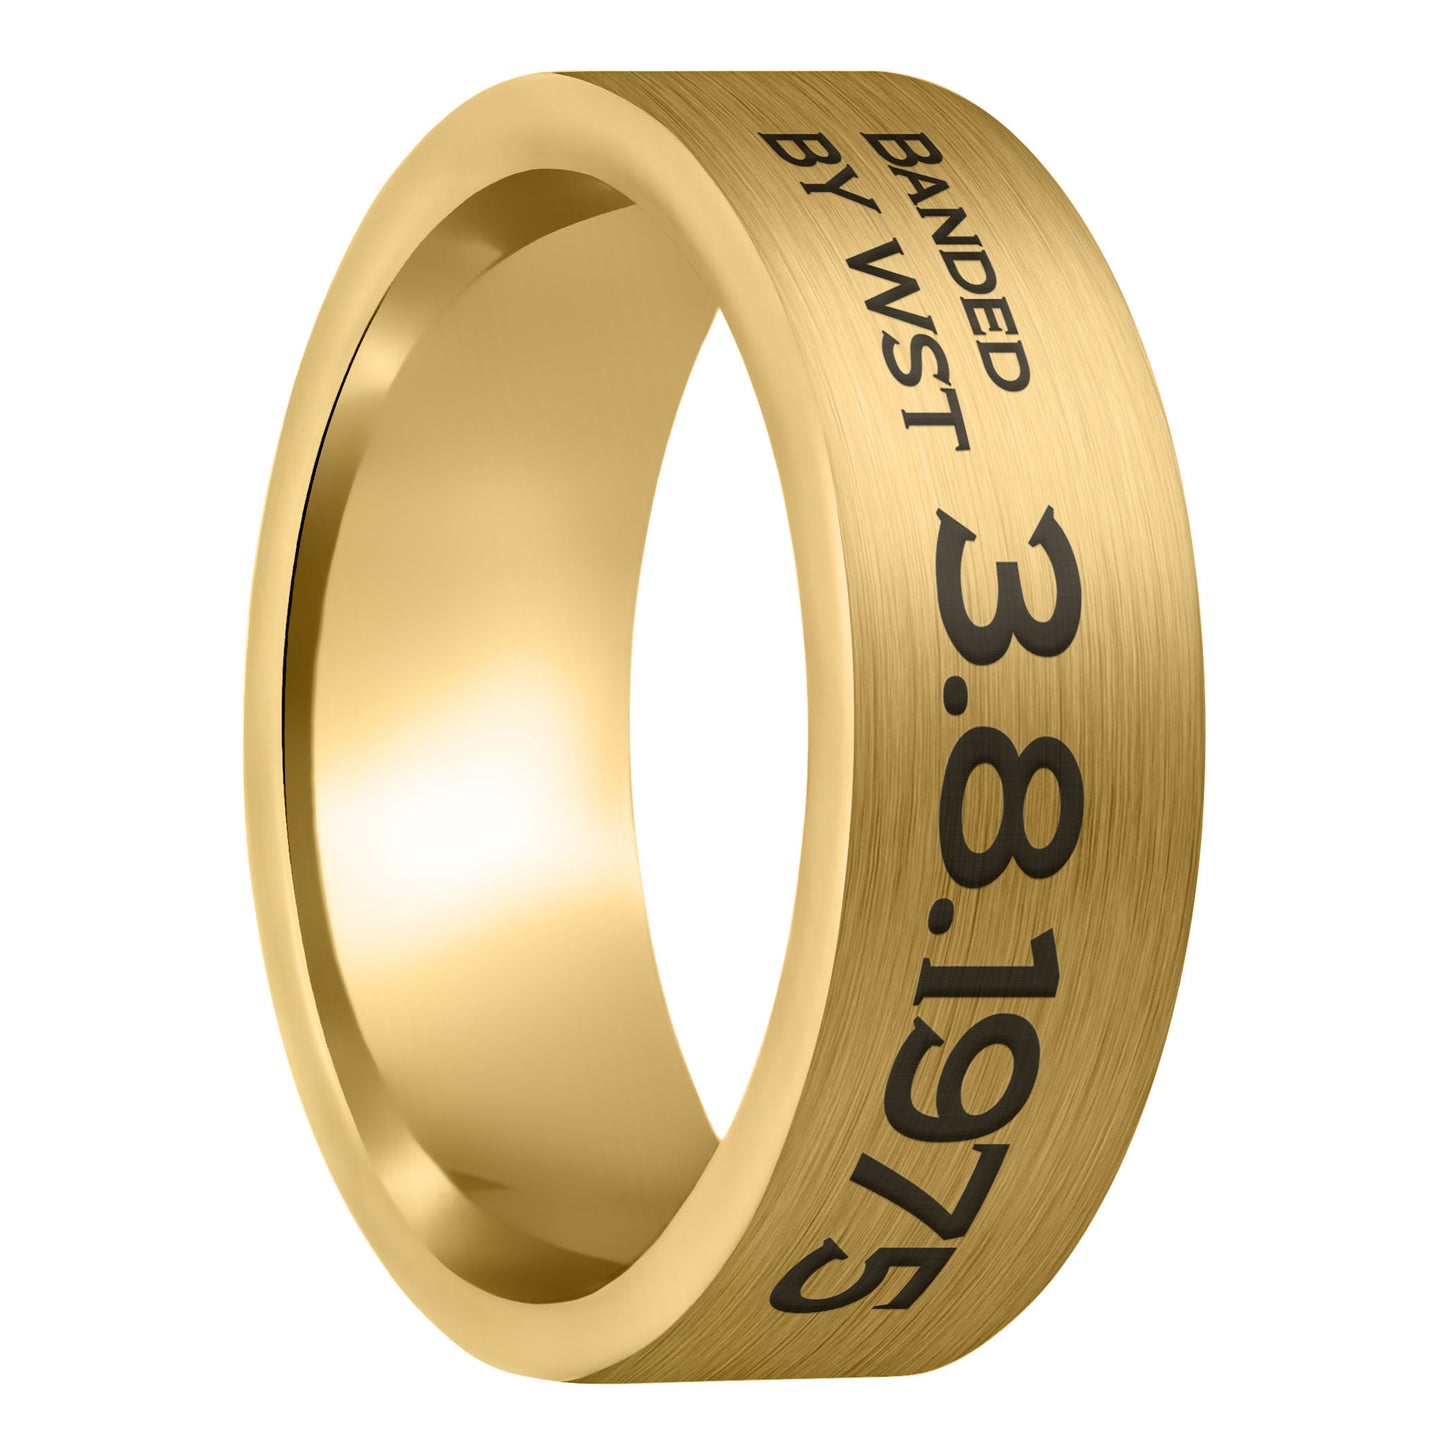 A duck band style custom engraved brushed gold tungsten men's wedding band displayed on a plain white background.